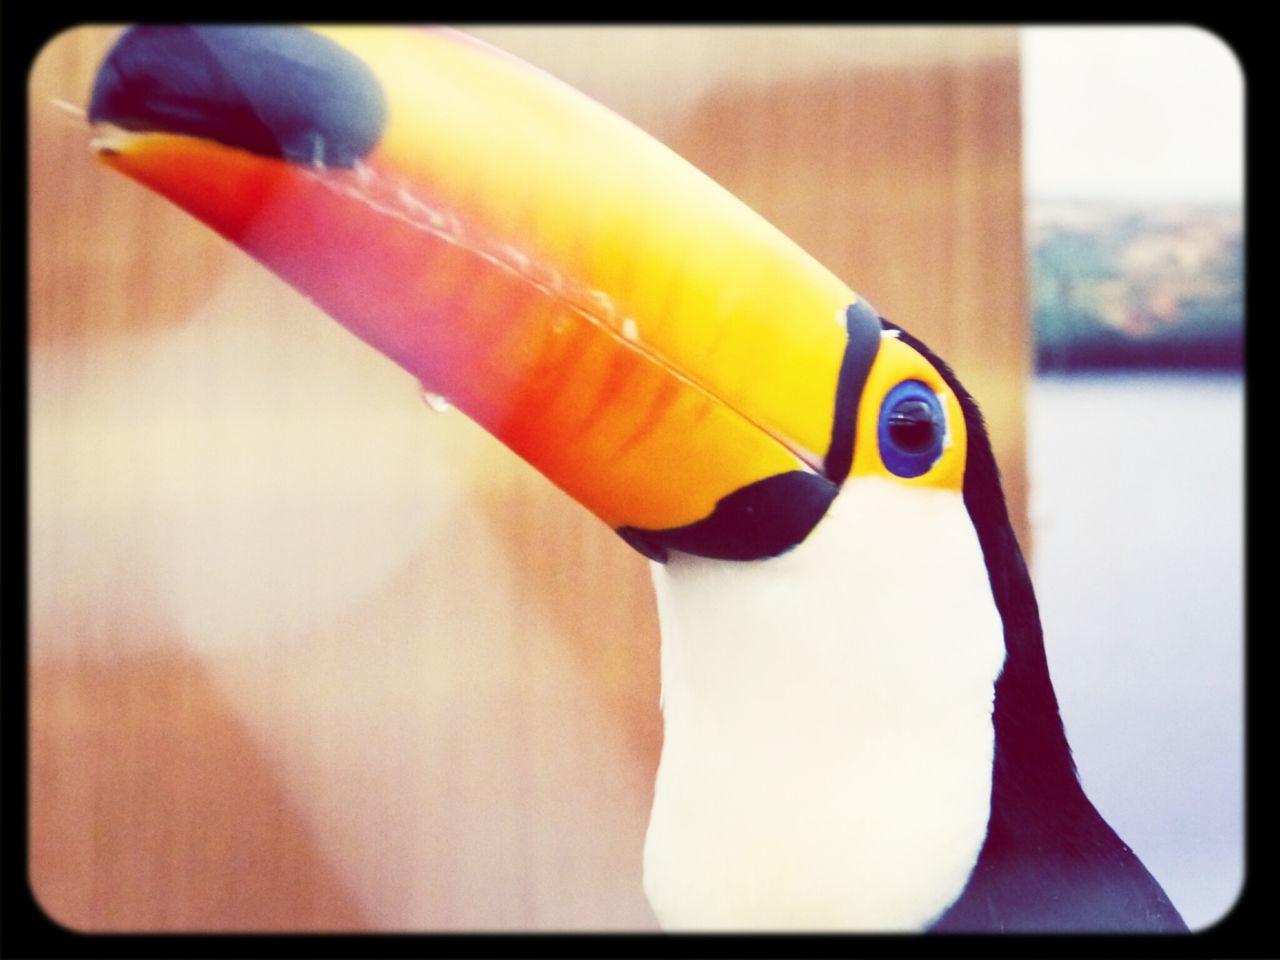 transfer print, close-up, one animal, auto post production filter, yellow, focus on foreground, multi colored, animal themes, toy, bird, animal head, beak, wildlife, part of, indoors, animals in the wild, one person, day, selective focus, parrot